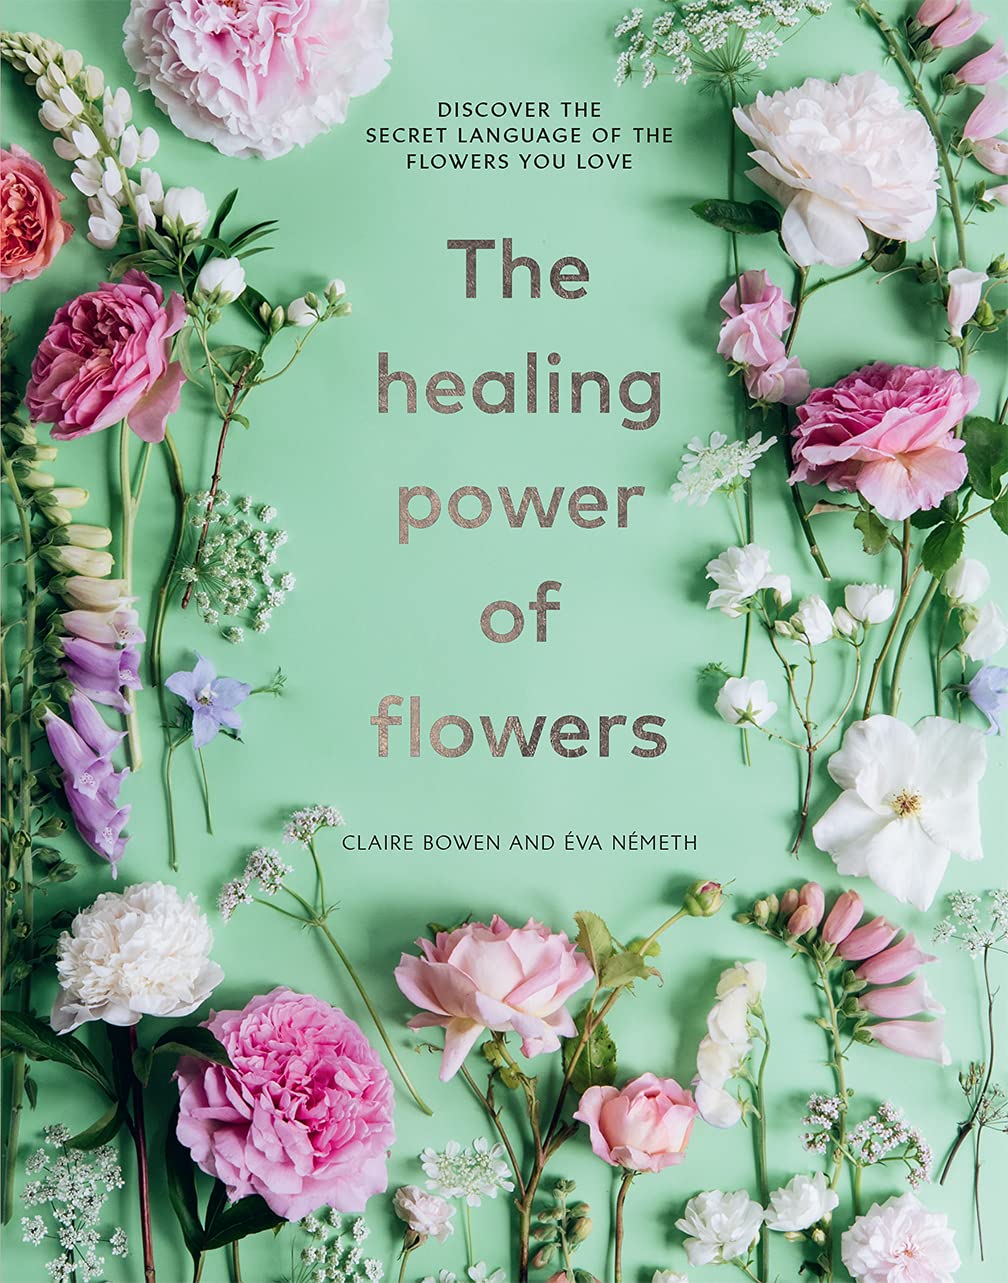 The Healing Power Of Flowers: Discover The Secret Language Of The Flowers You Love [Clare Bowen & Eva Nemeth]